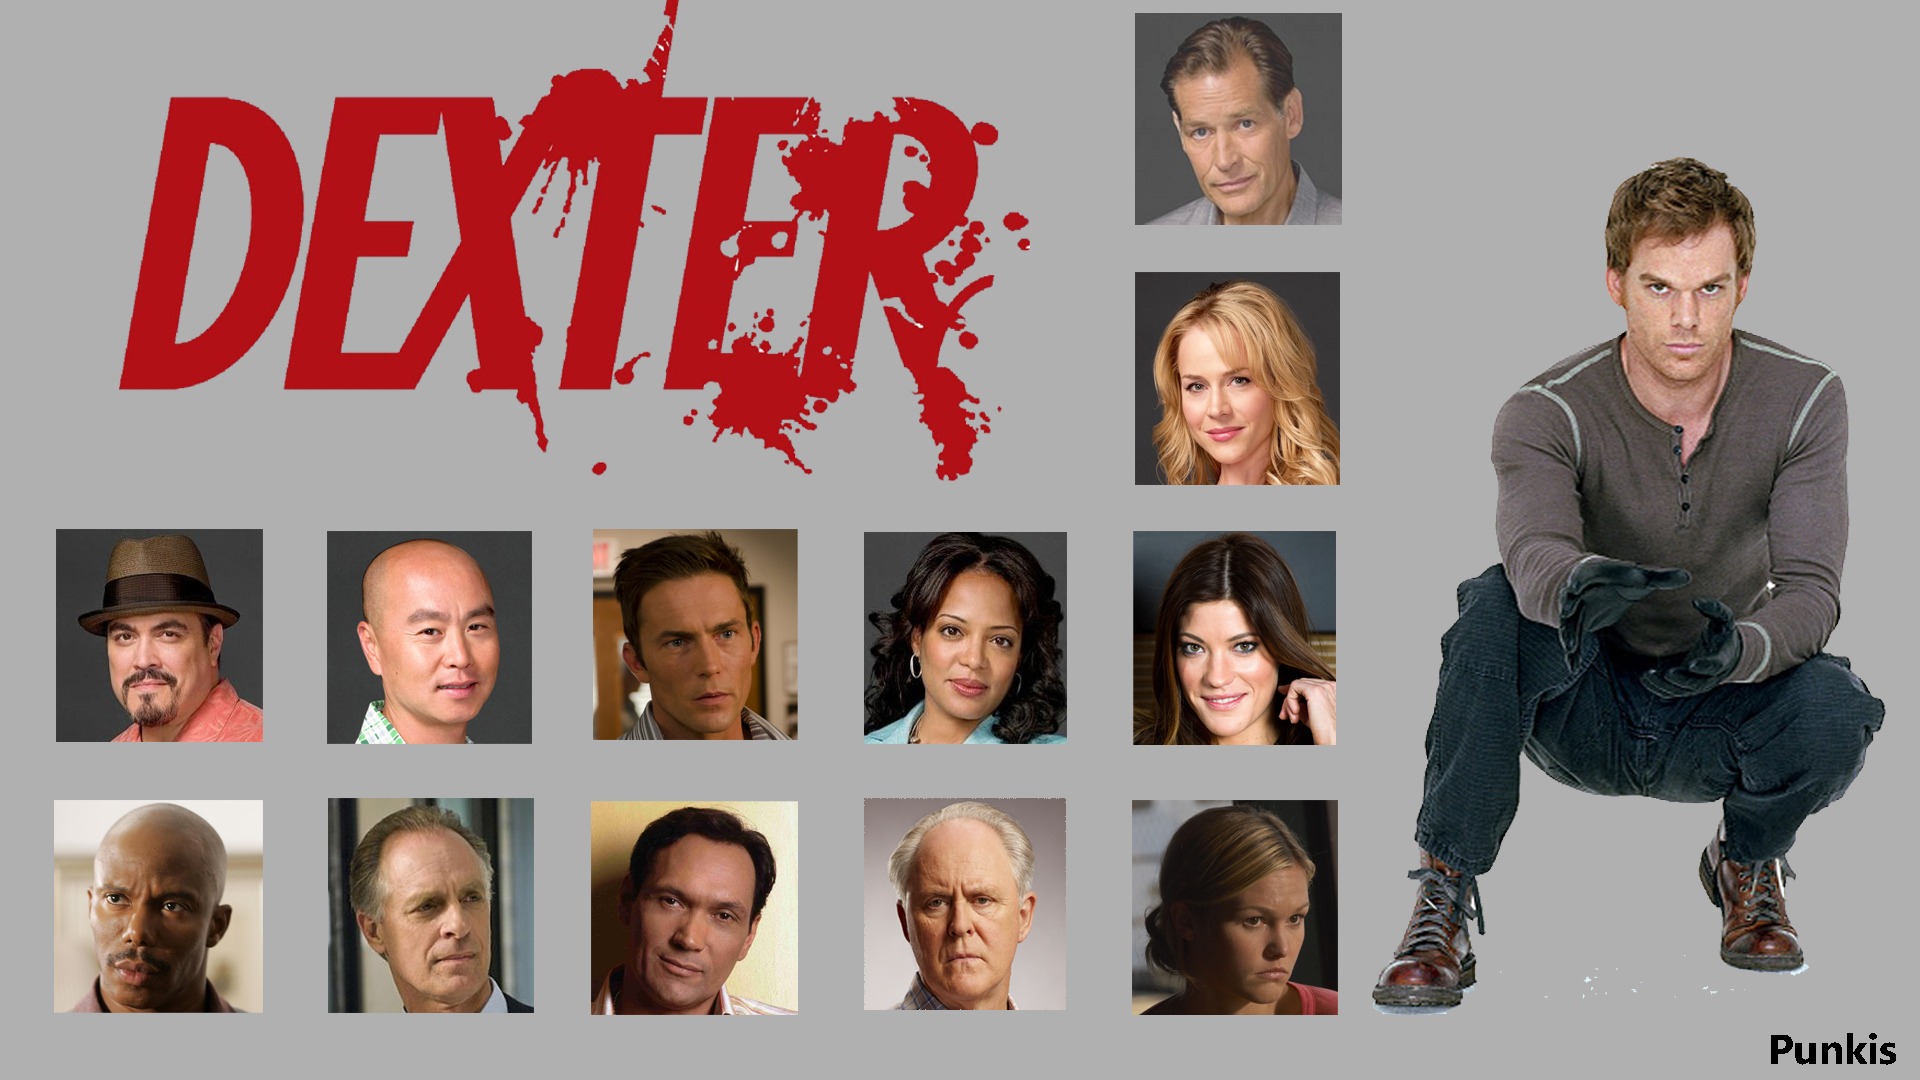 Dexter All Starz HD 1080p Wallpaper By Thepunkis23 On